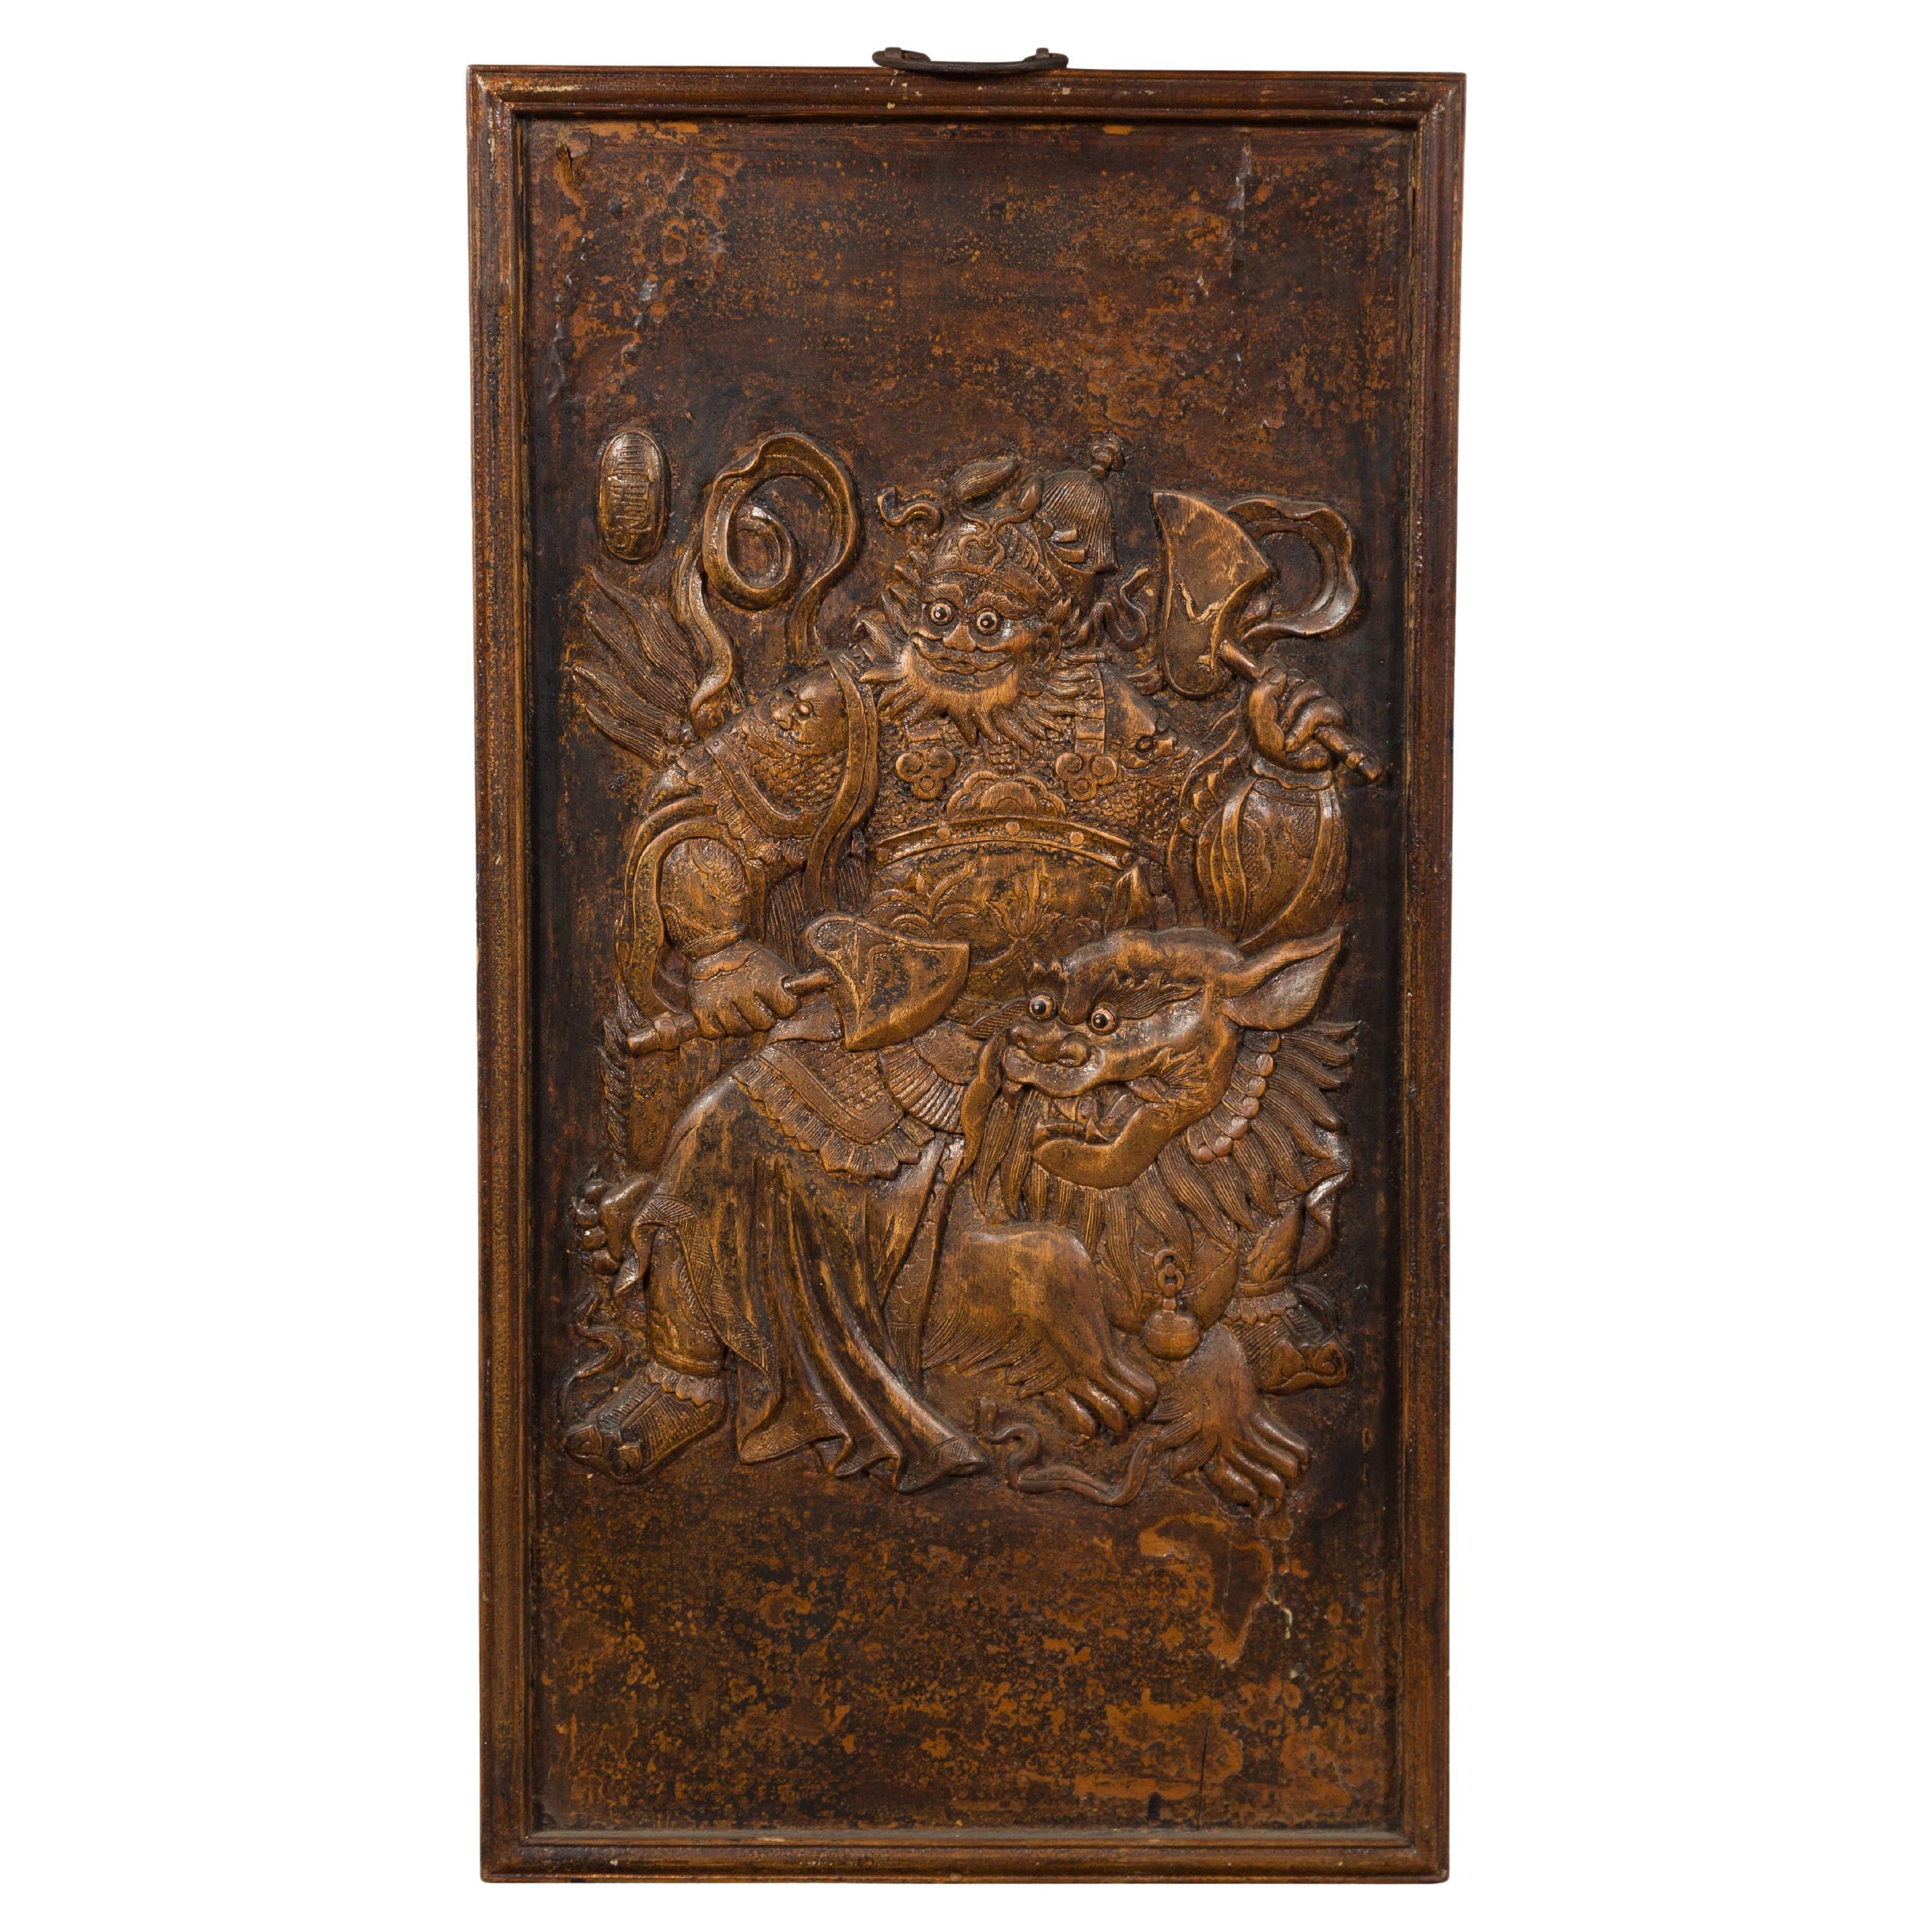 Chinese Zhejiang Vintage Low-Relief Wall Plaque Depicting a Celestial Guardian